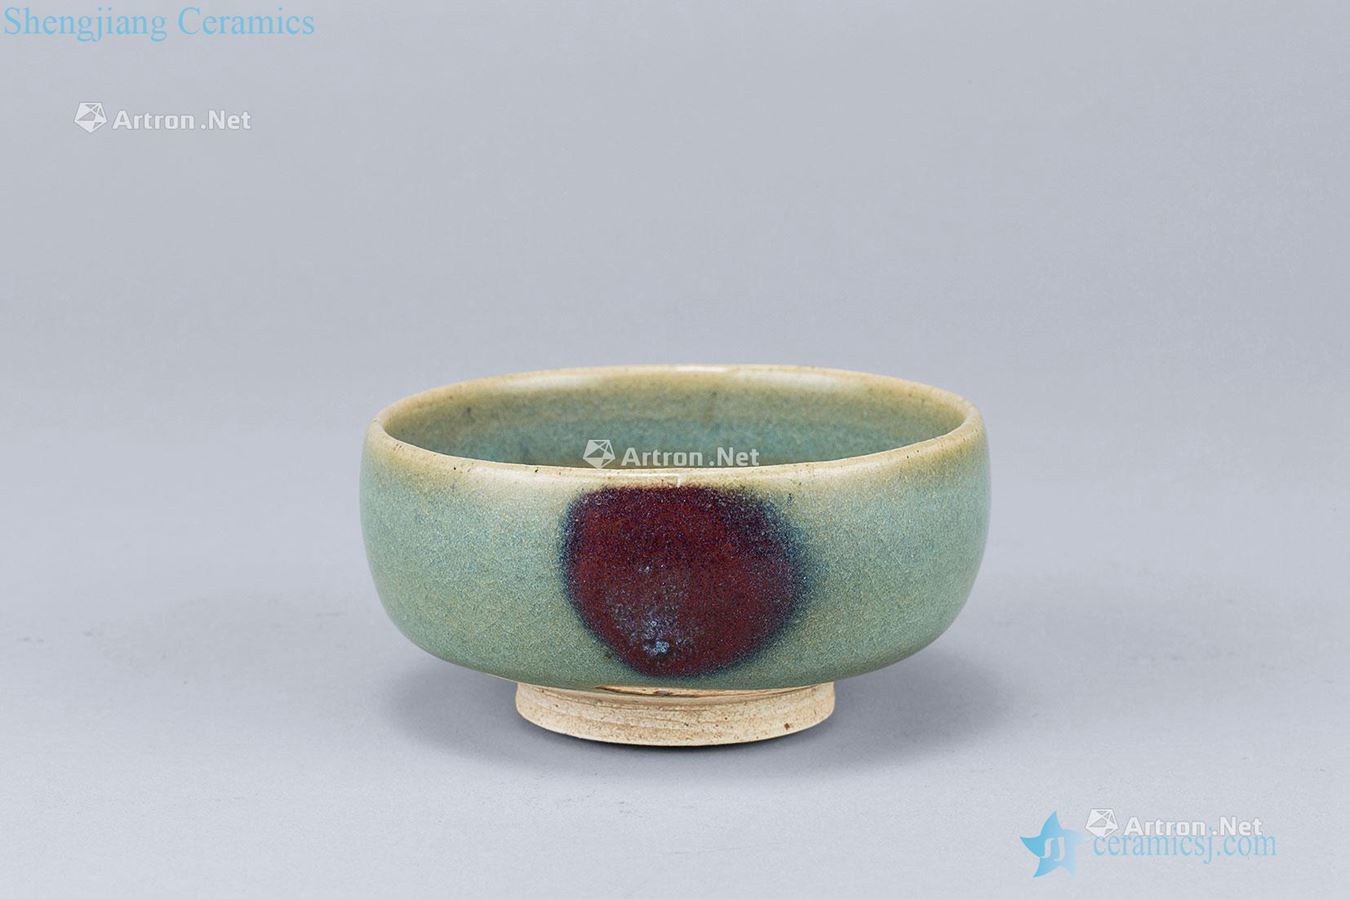 The yuan dynasty (1279-1368), erythema masterpieces small bowl